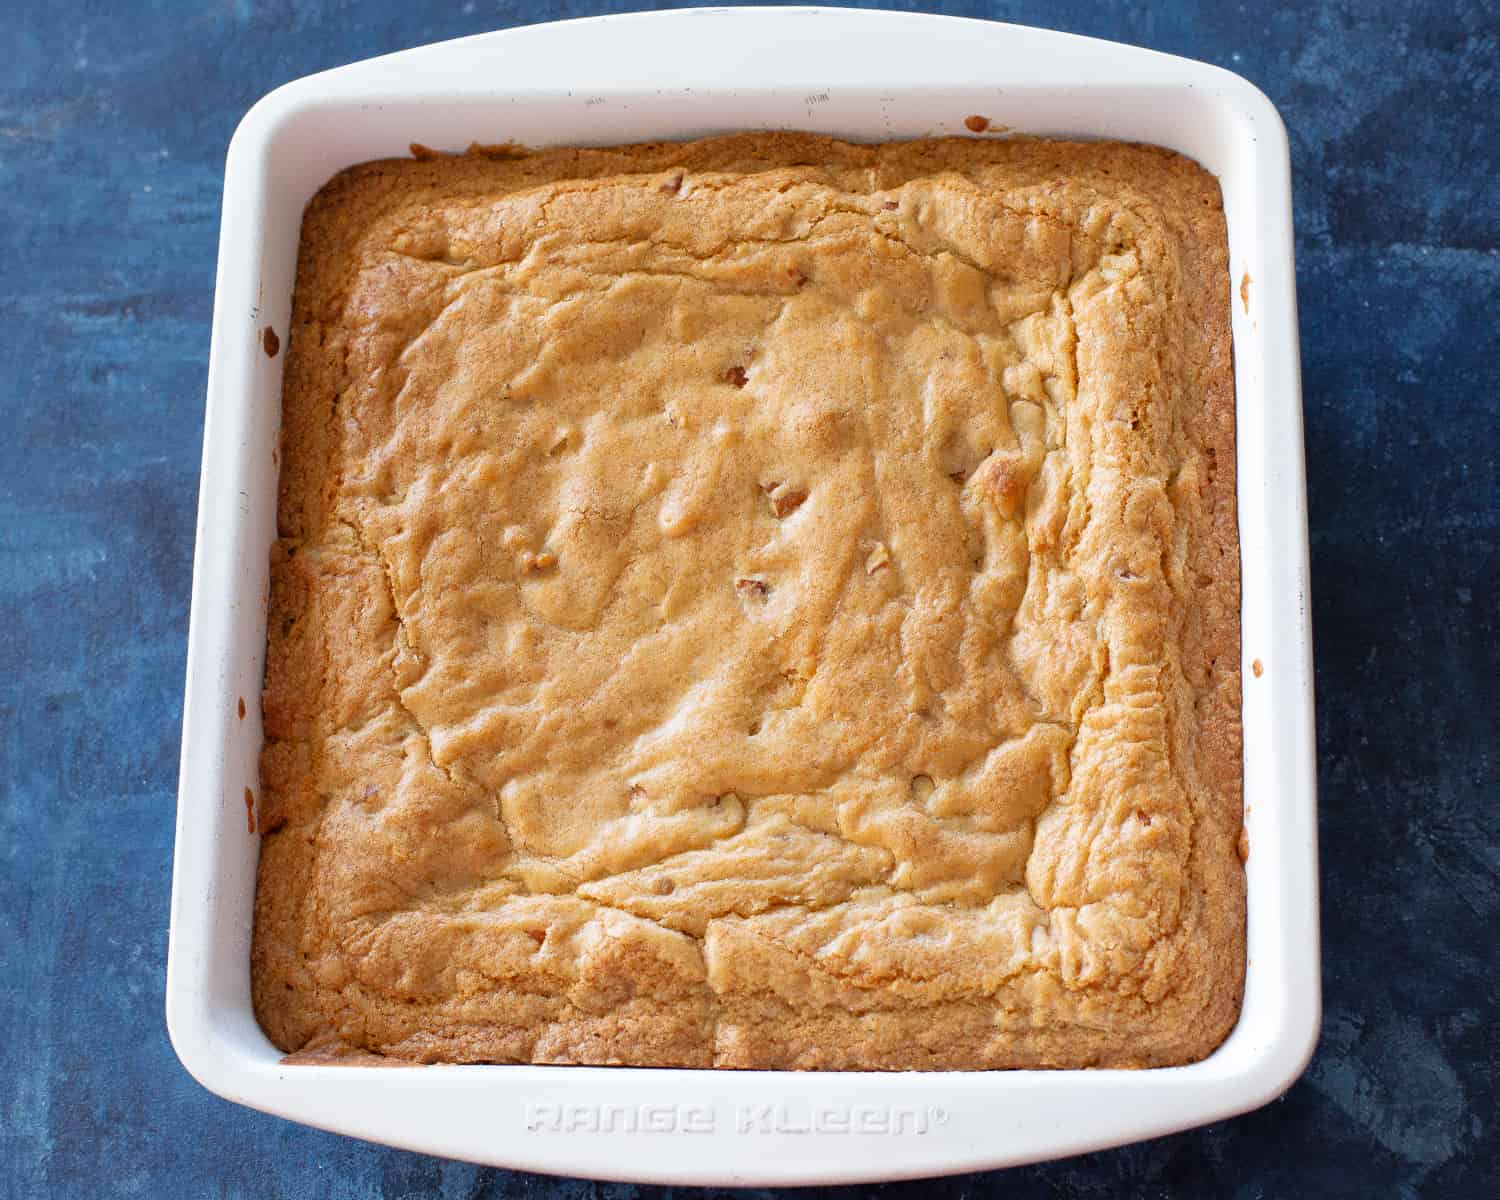 blondies baked in a white pan